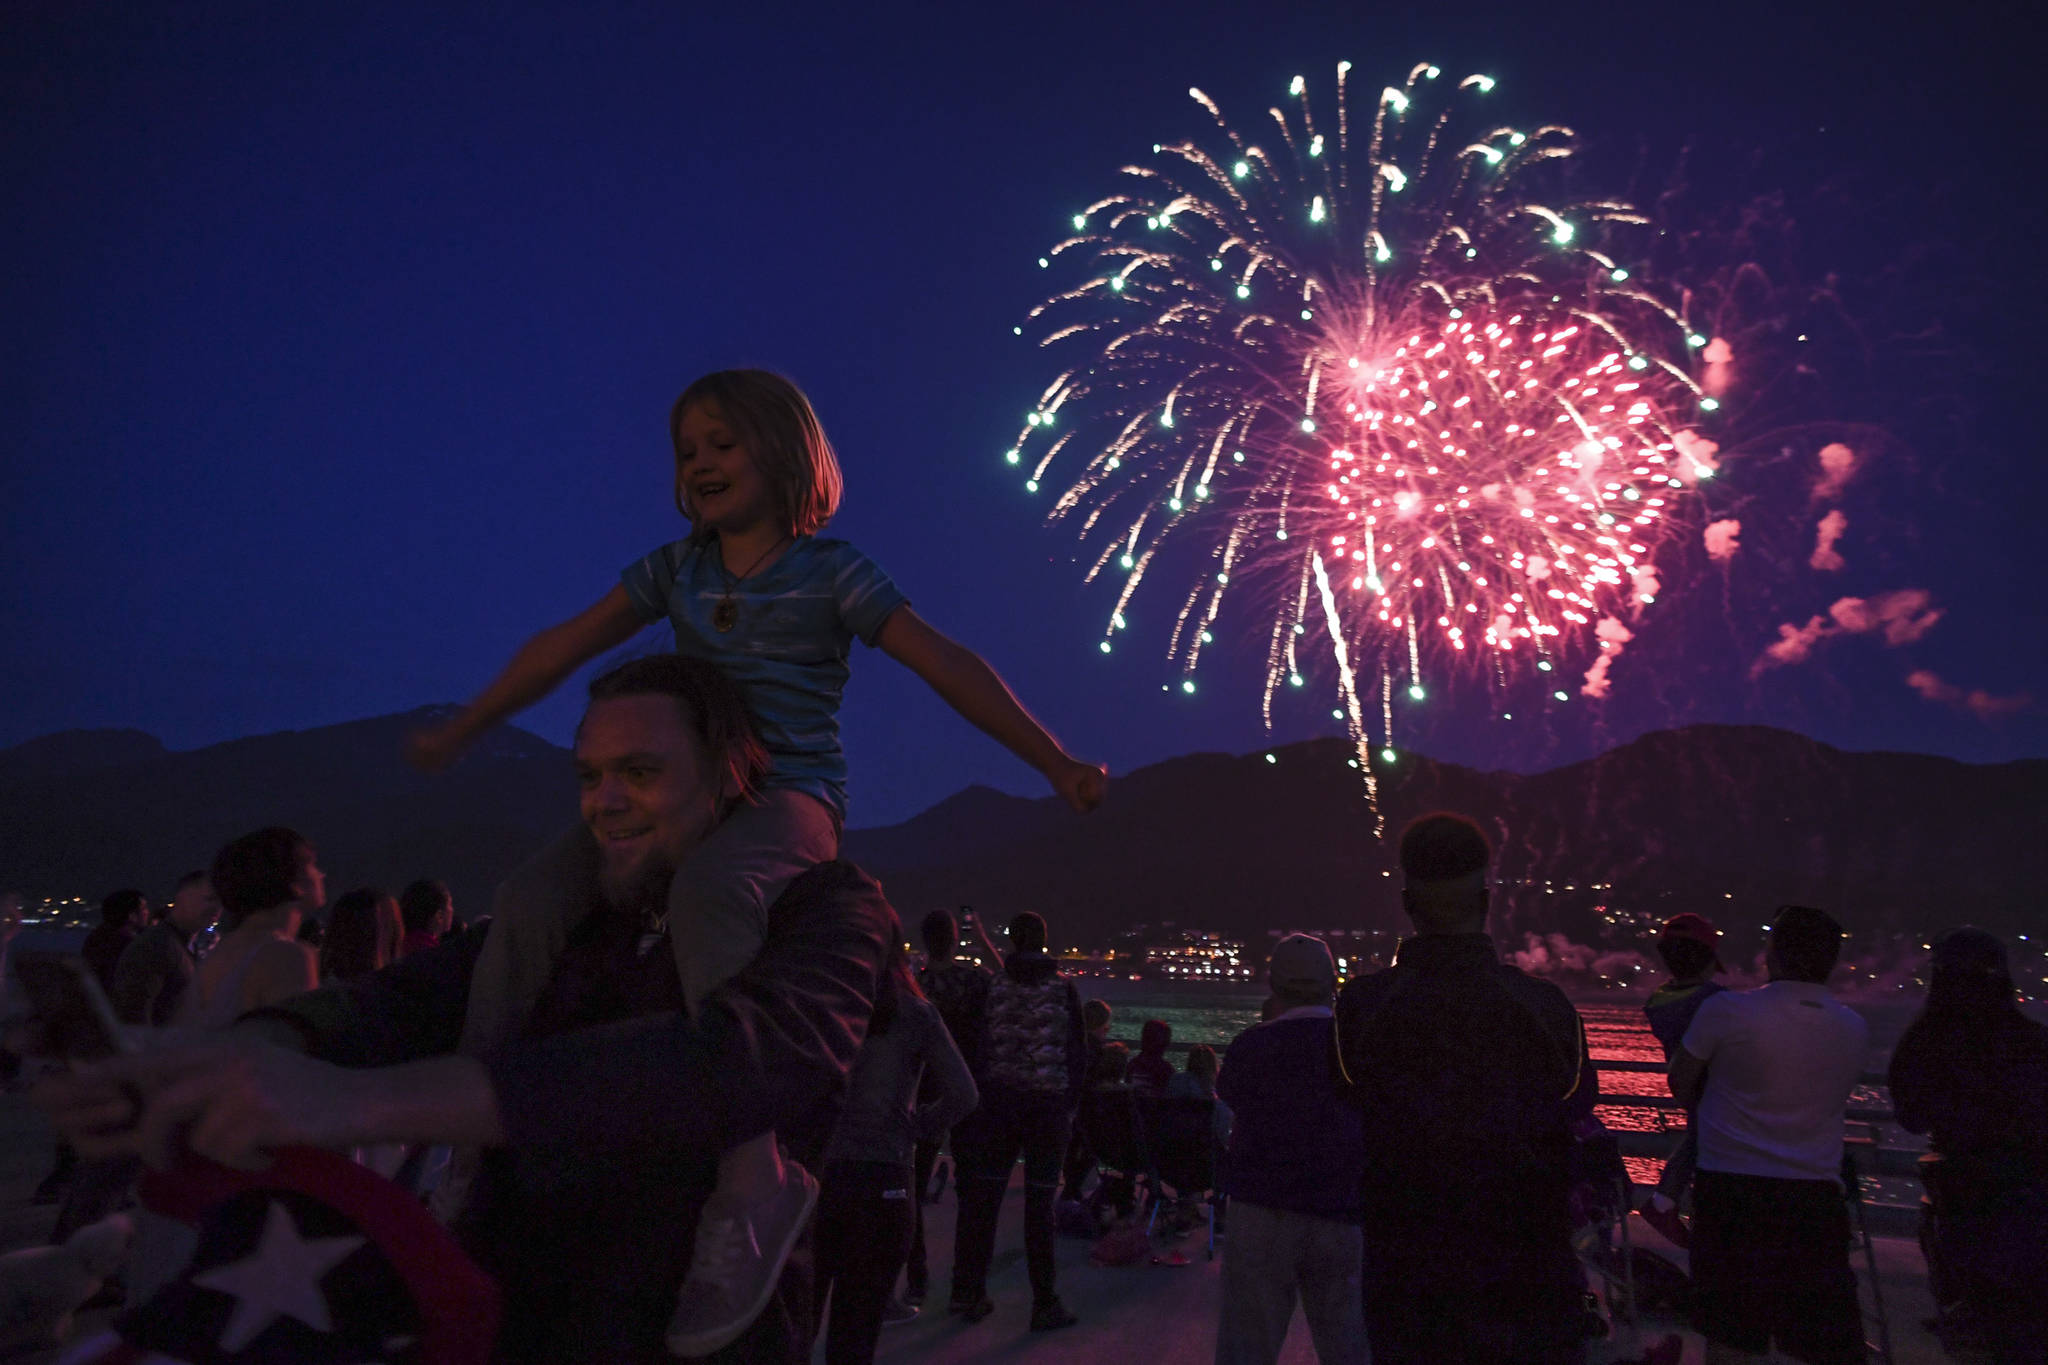 A father and daughter take a selfie as they watch the annual fireworks display on Wednesday, July 3, 2019. (Michael Penn | Juneau Empire)